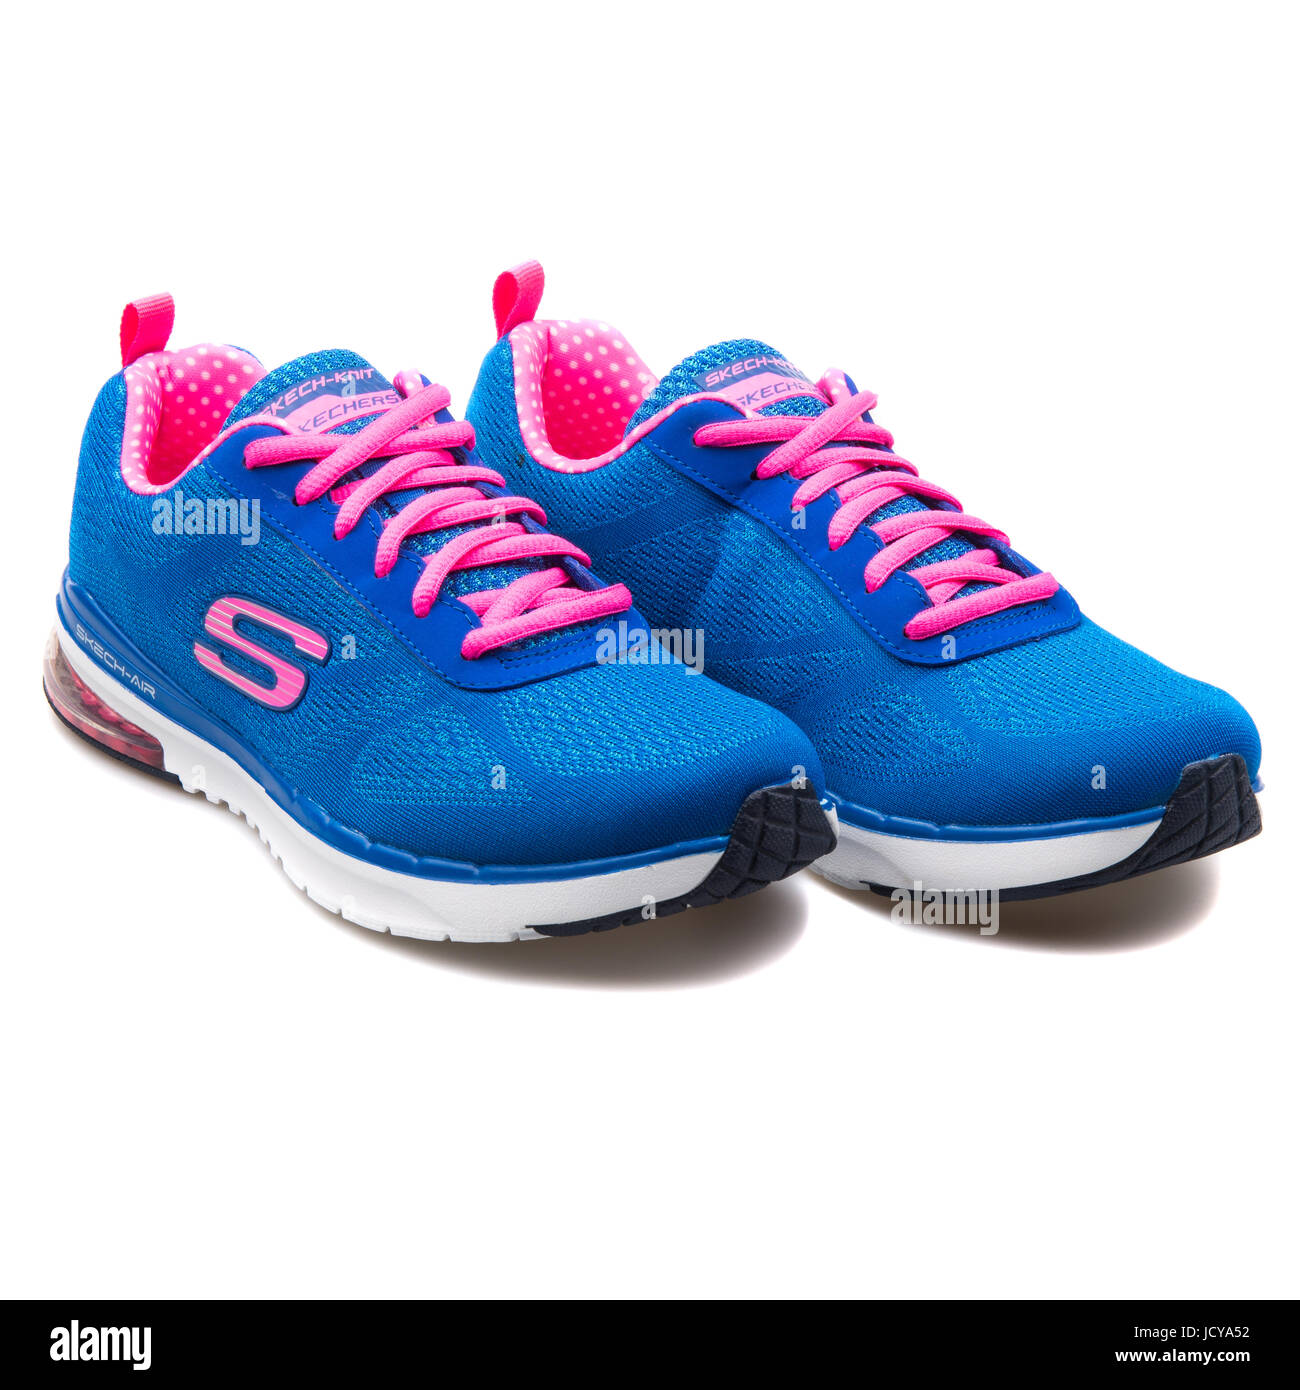 Skechers Skech-Air Infinity Blue and Hot Pink Women's Running Shoes -  12111-BLHP Stock Photo - Alamy